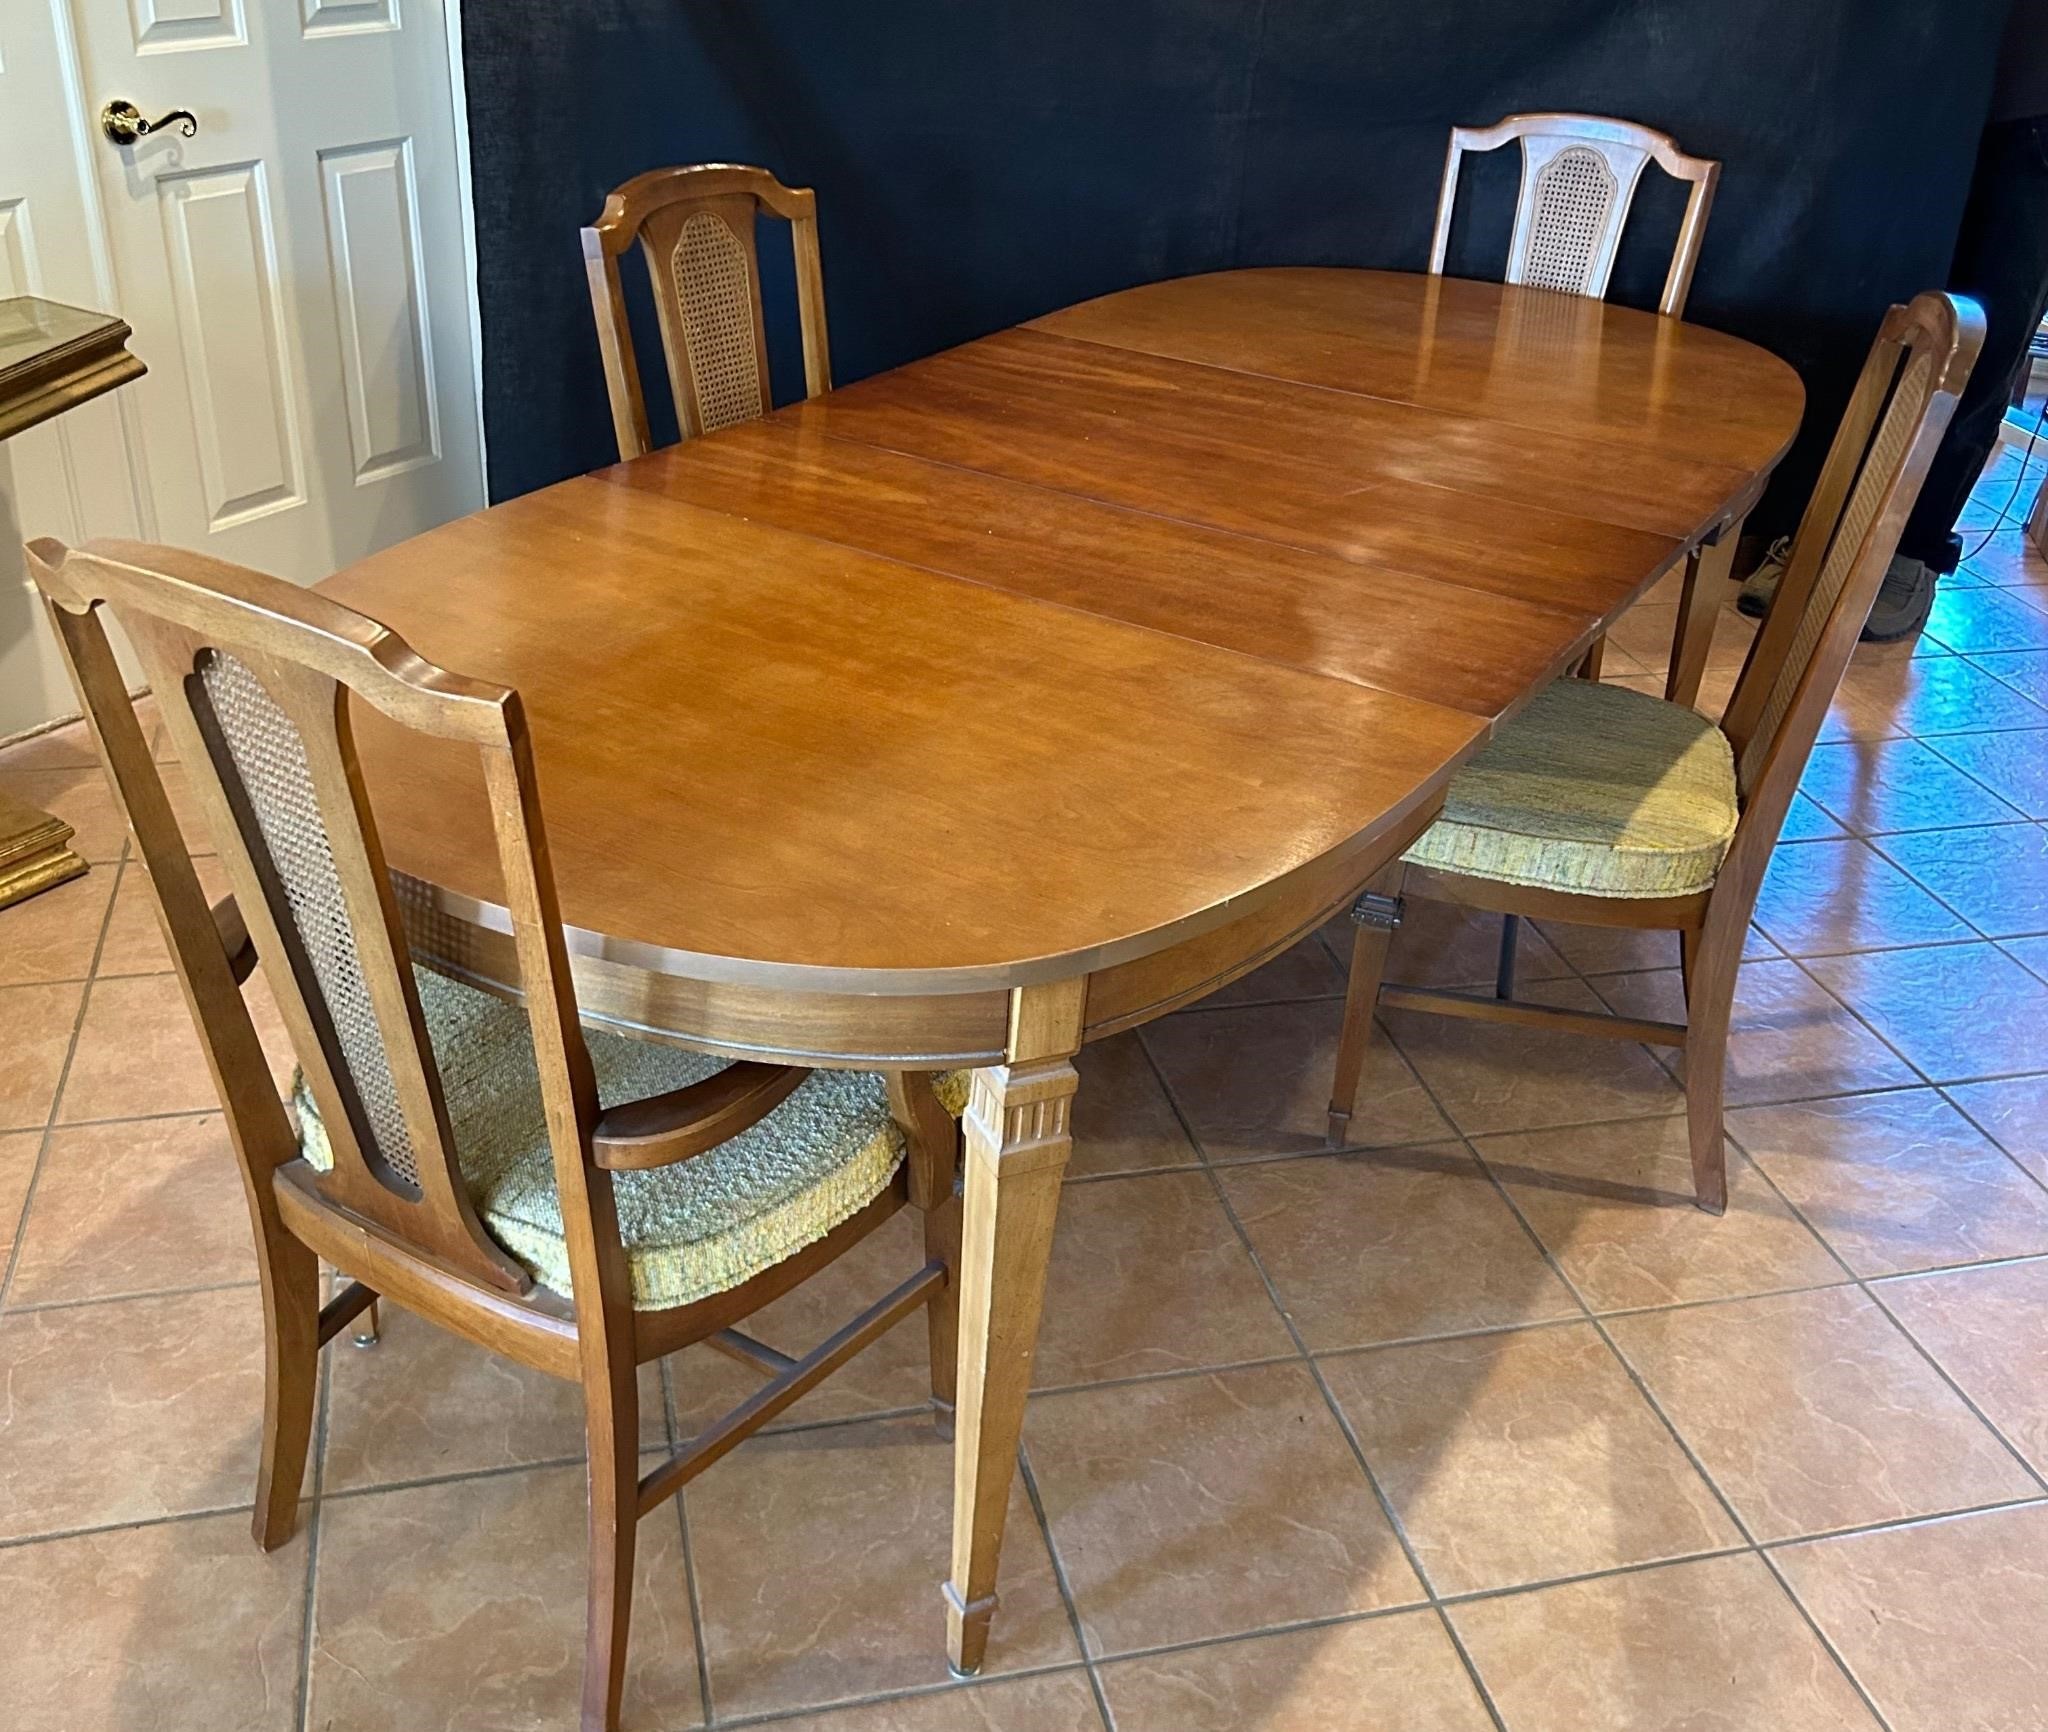 Early American Dining Room Table & 4 Chair